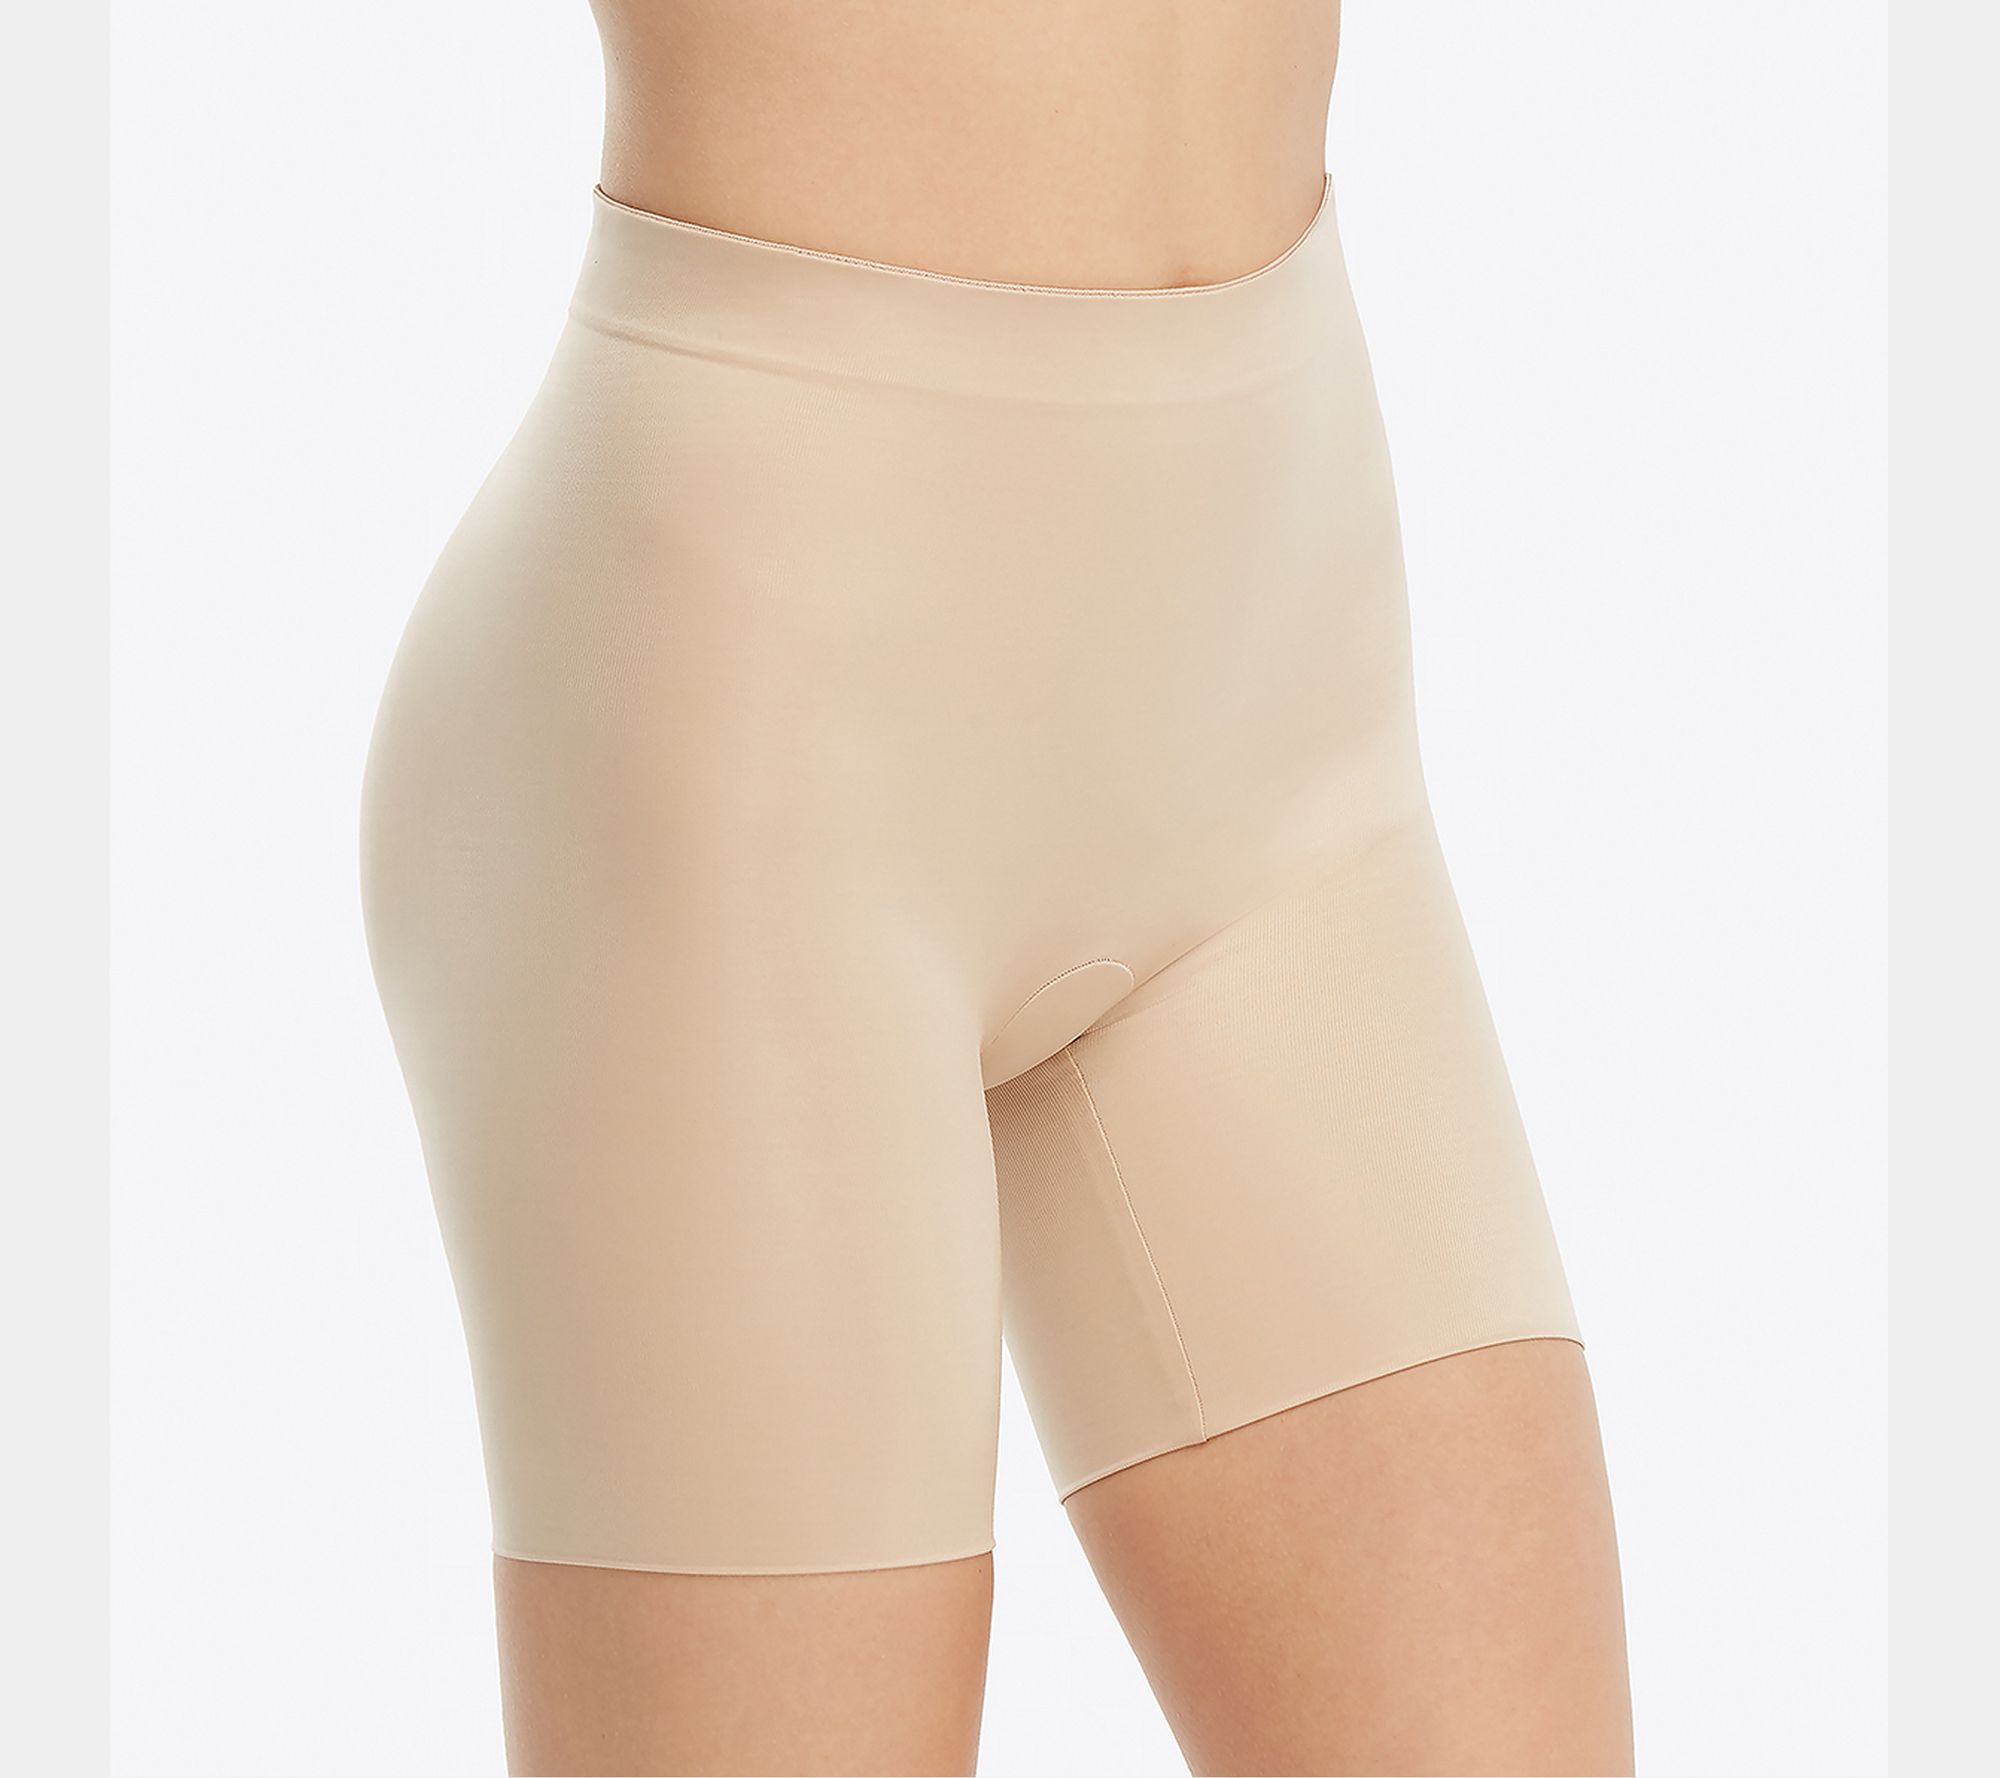 Spanx Suit Your Fancy Butt Enhancer Shaping Shorts on QVC 